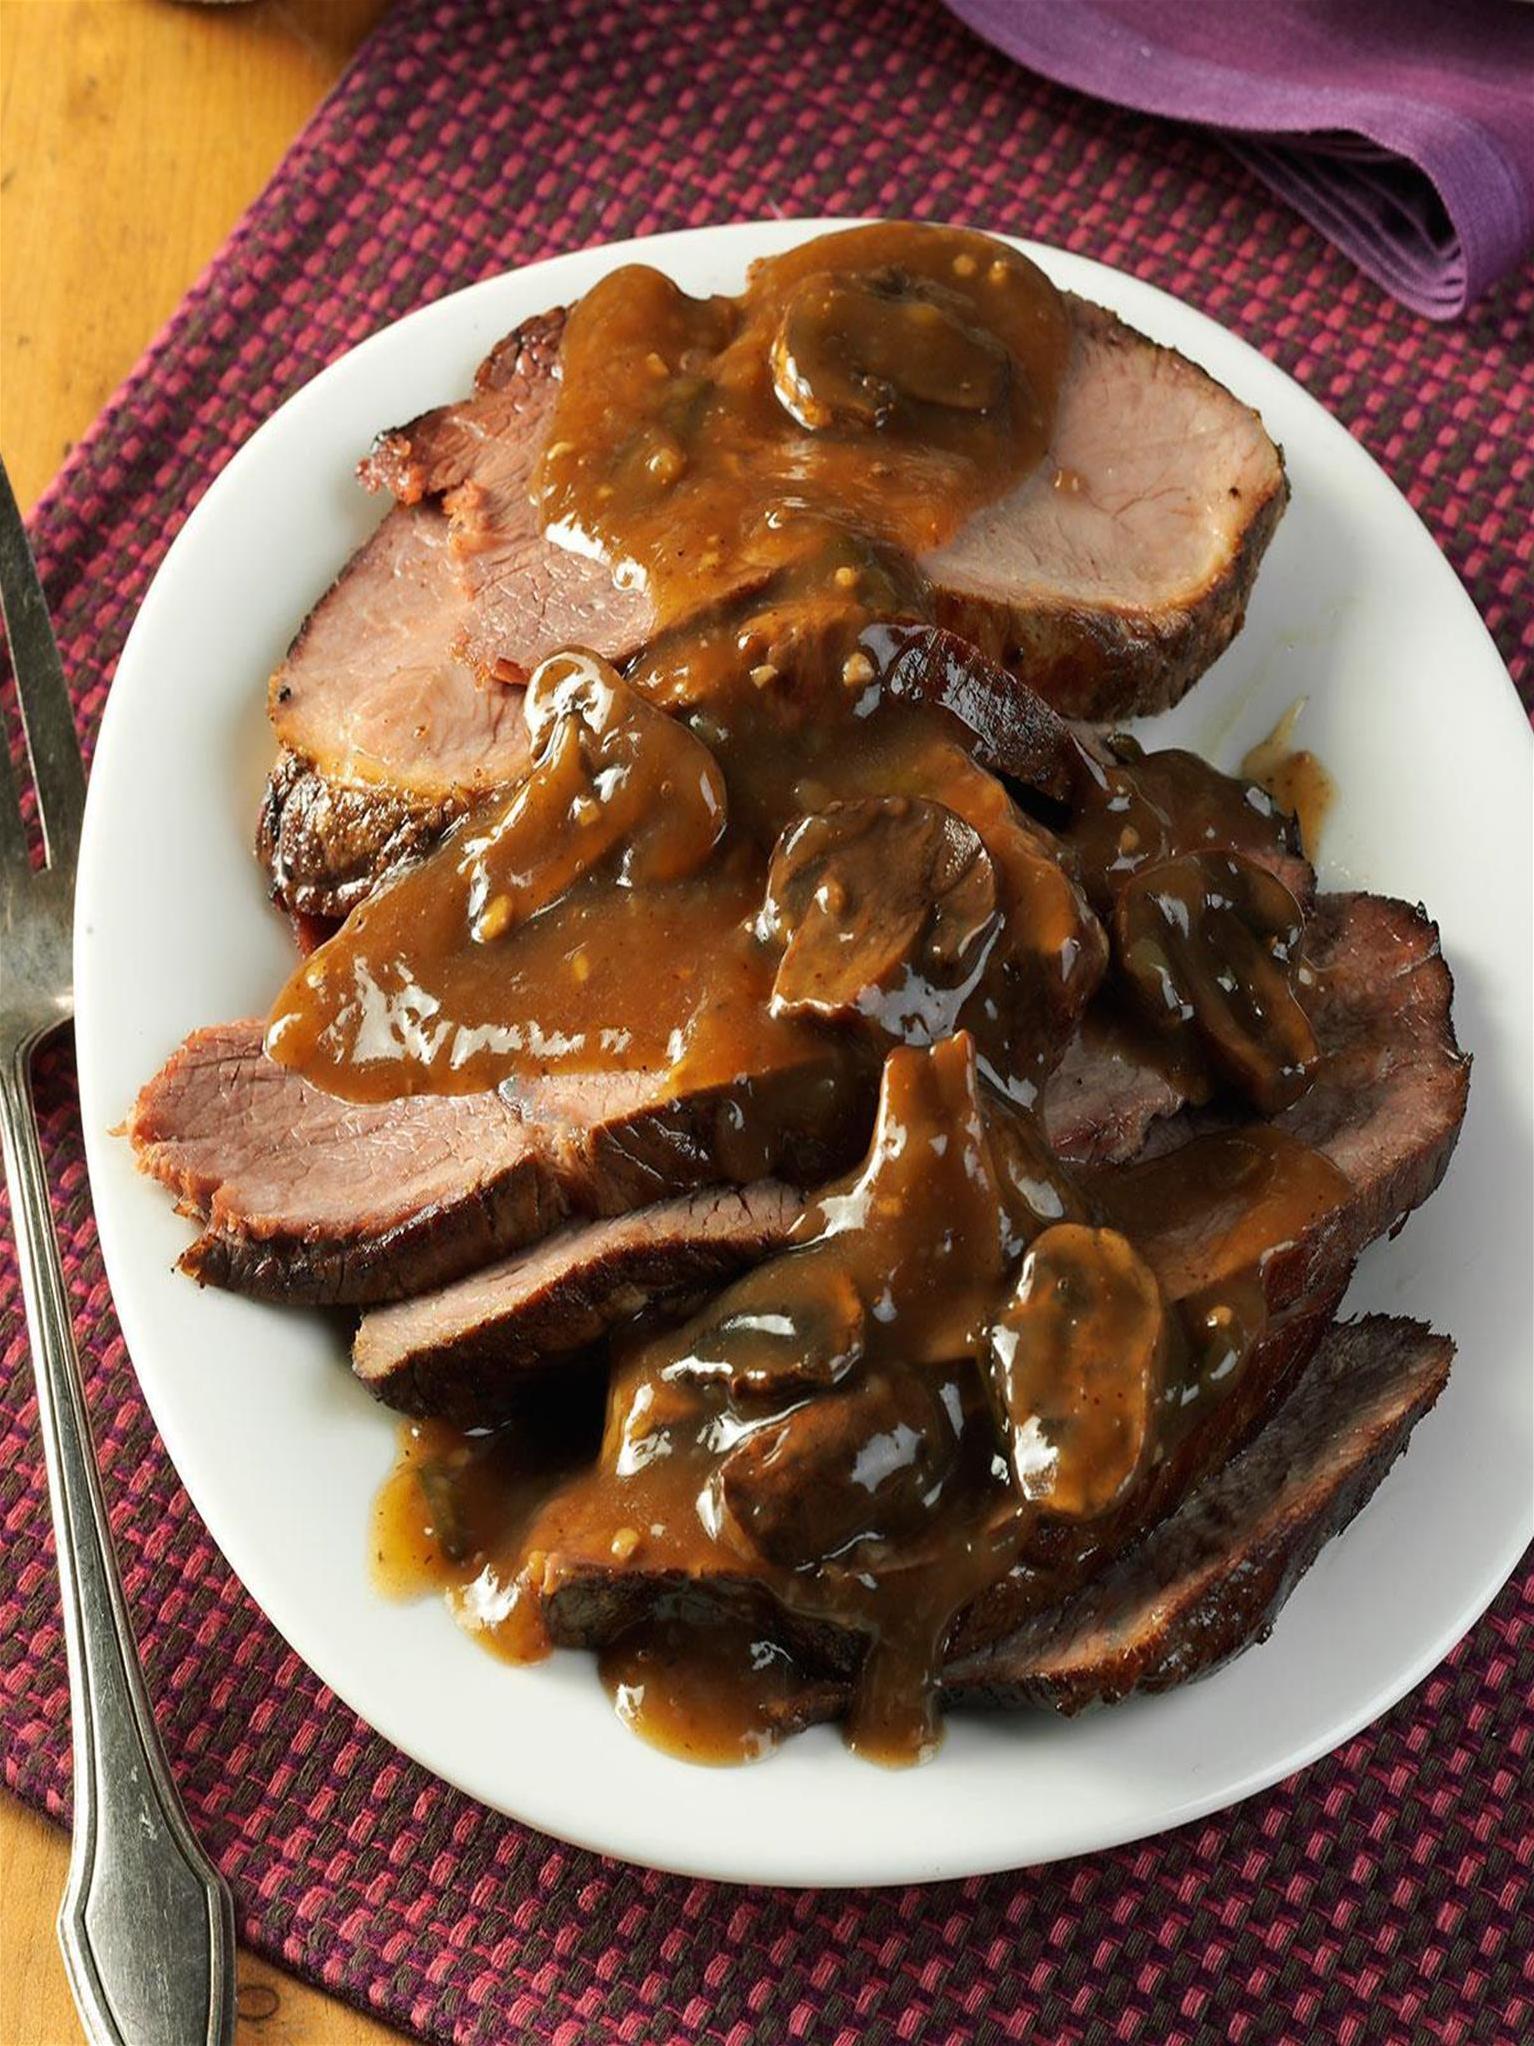  Who says coffee is just for drinking? Try it as a marinade for a delicious roast.